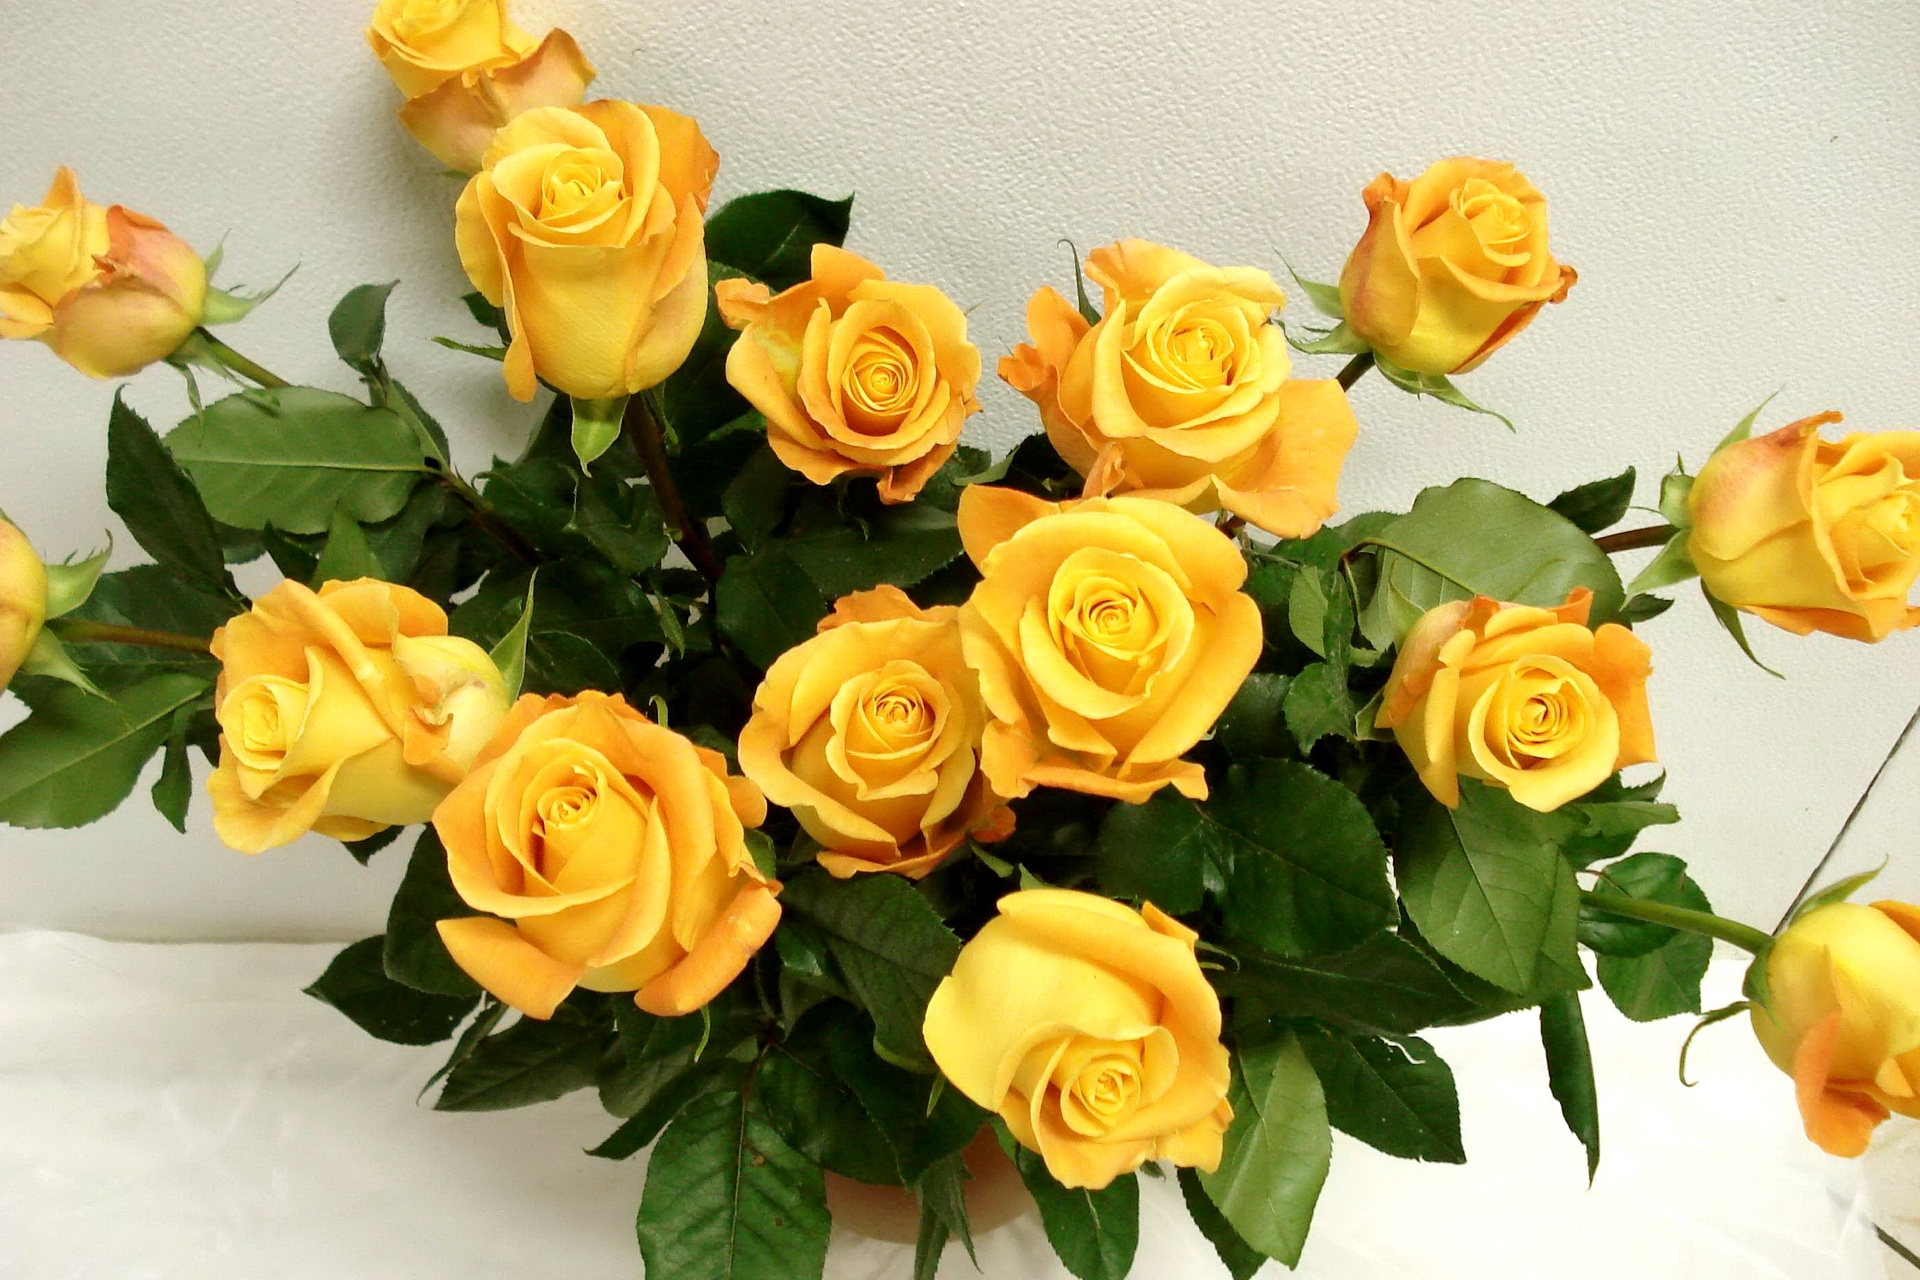 bouquet, roses, flowers, yellow, vase, gorgeous, chic cellphone